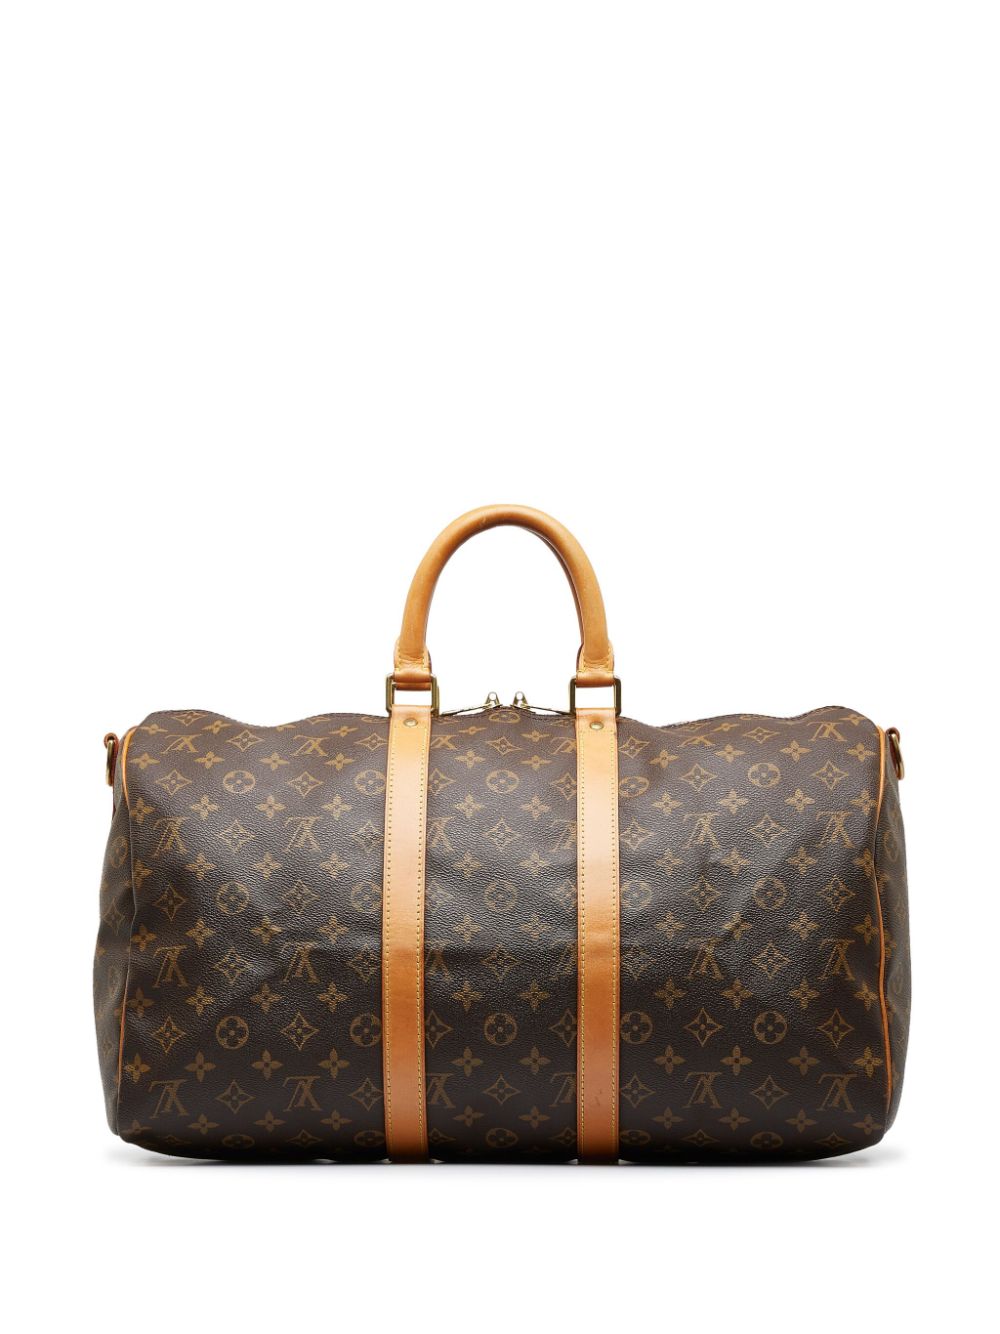 Louis Vuitton 1996 pre-owned Keepall 45 two-way travel bag - Bruin